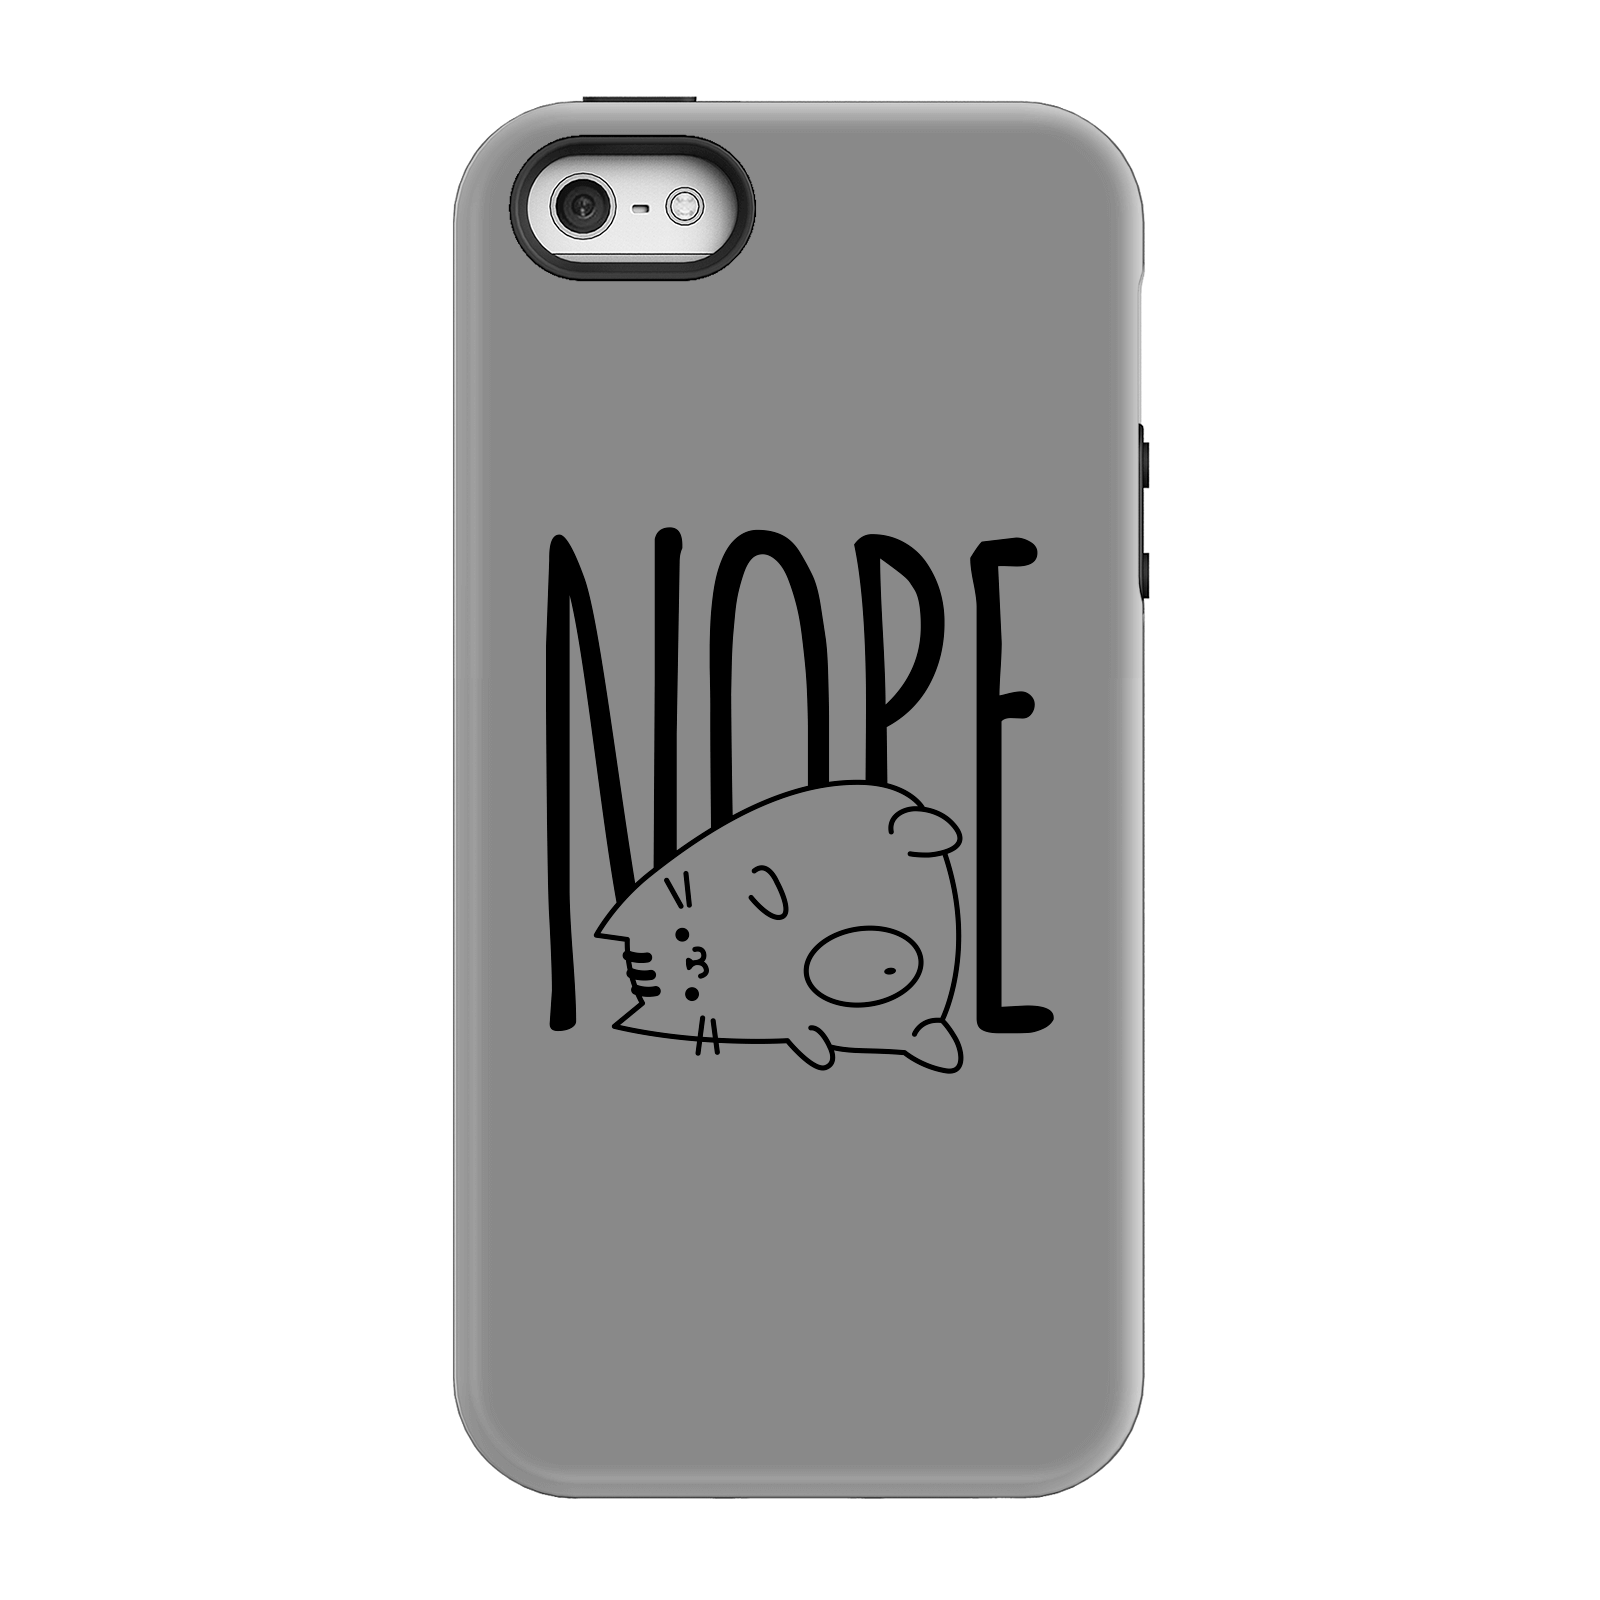 Nope Phone Case for iPhone and Android - iPhone 5/5s - Tough Case - Gloss